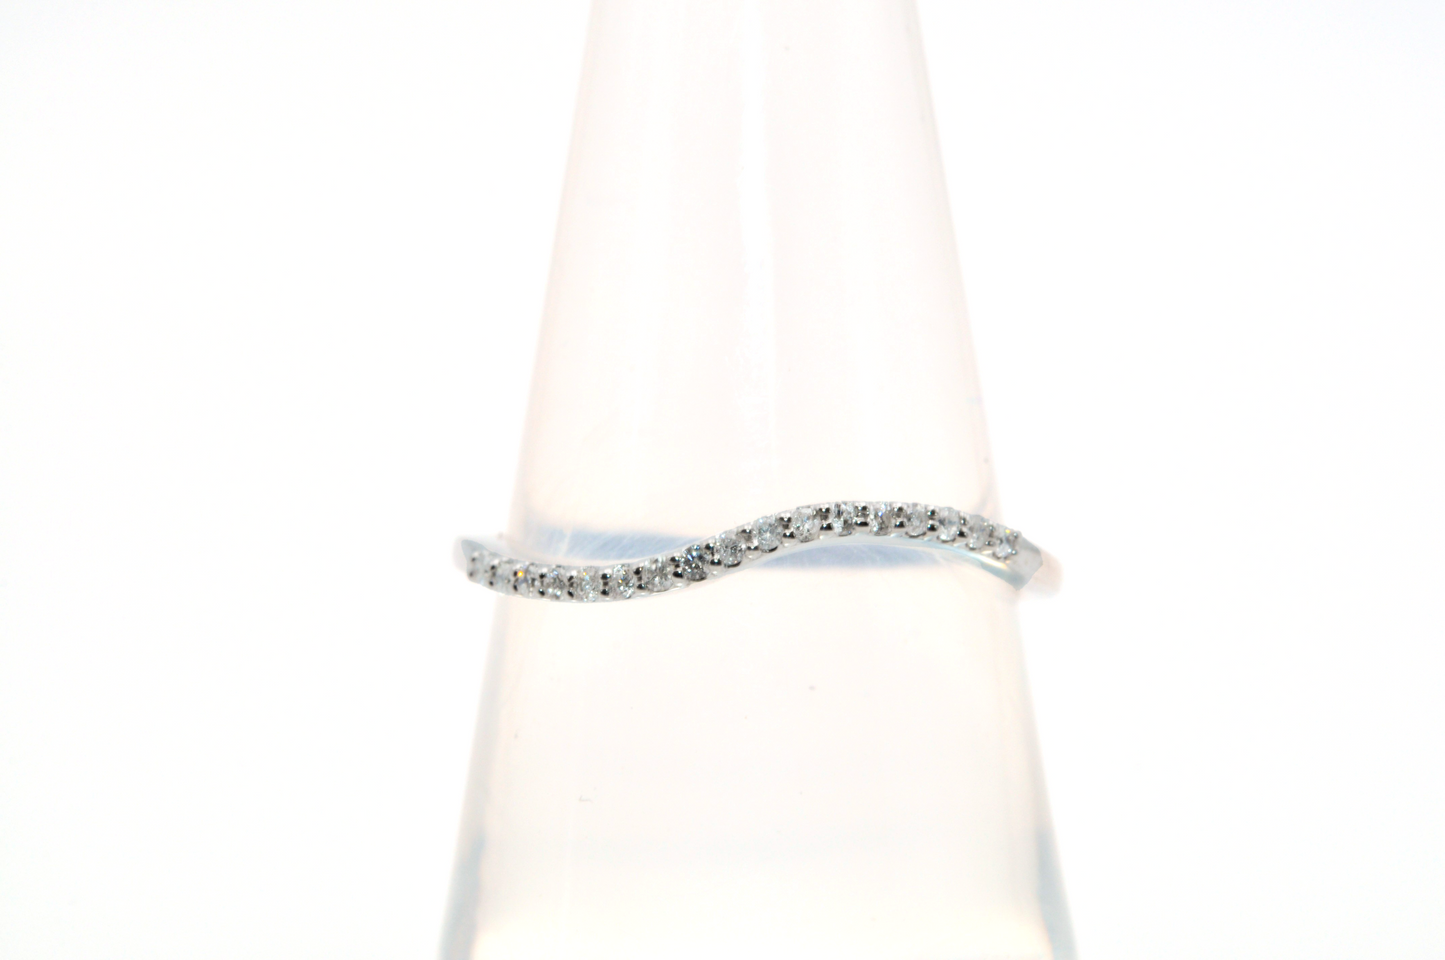 Thin White Gold Swirl Stackable Ring with Diamond Accents